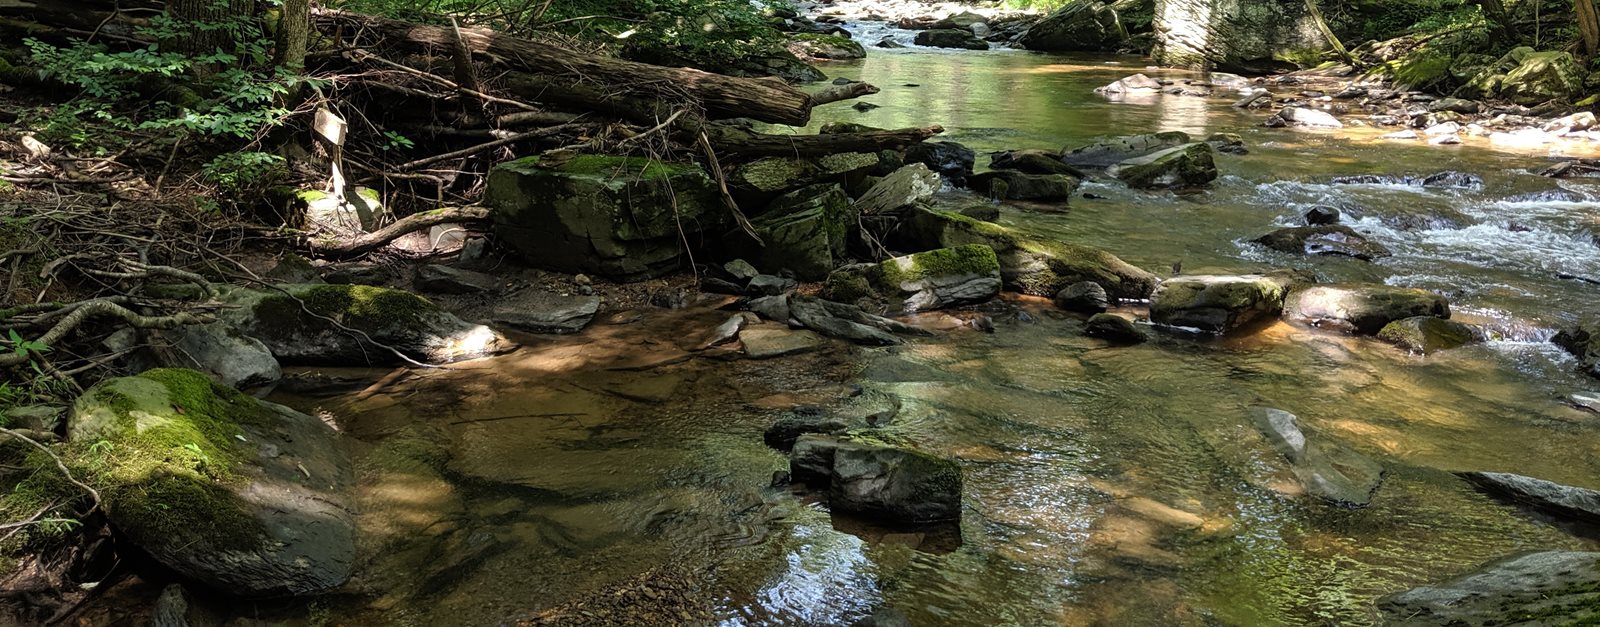 Image of a Creek